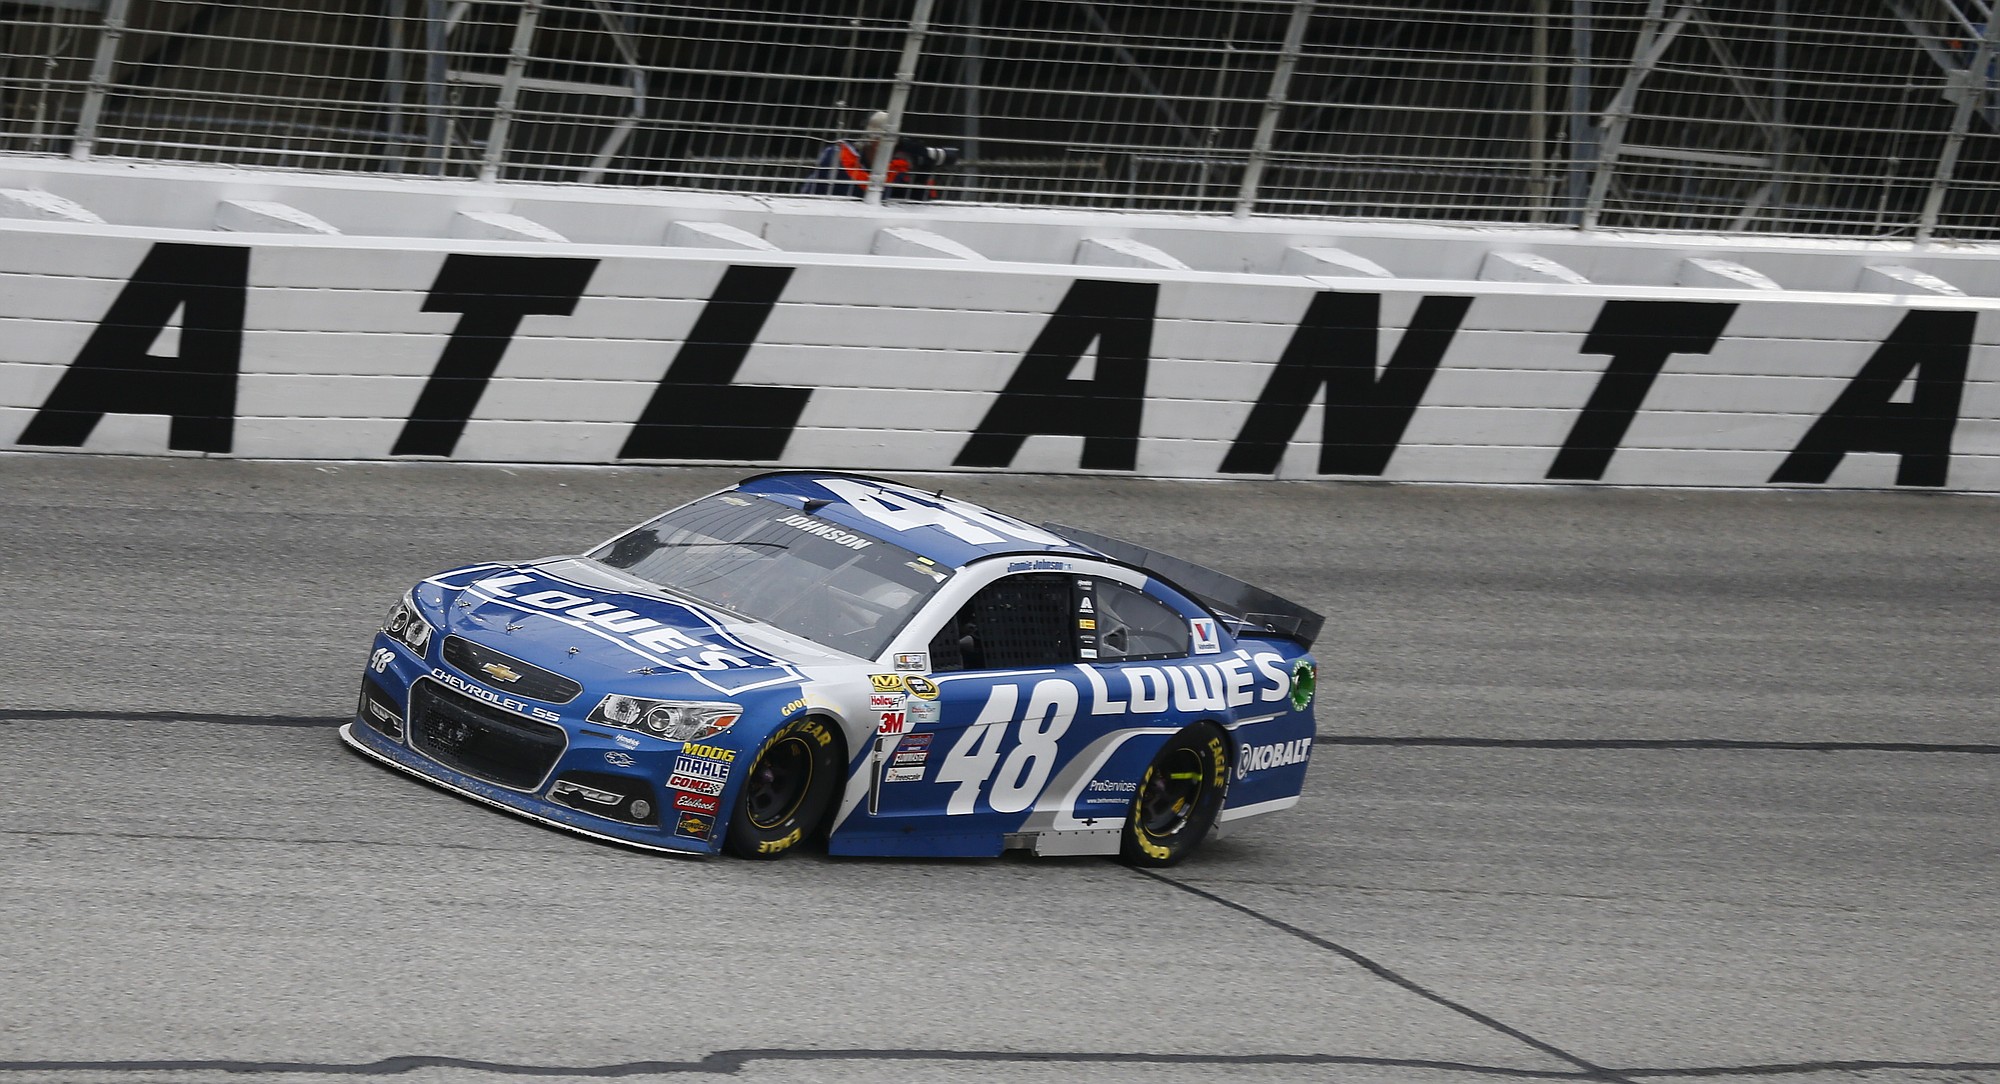 Jimmie Johnson (48) drives through Turn 4 during the NASCAR Sprint Cup series auto race at Atlanta Motor Speedway, Sunday, March 1, 2015, in Hampton, Ga.